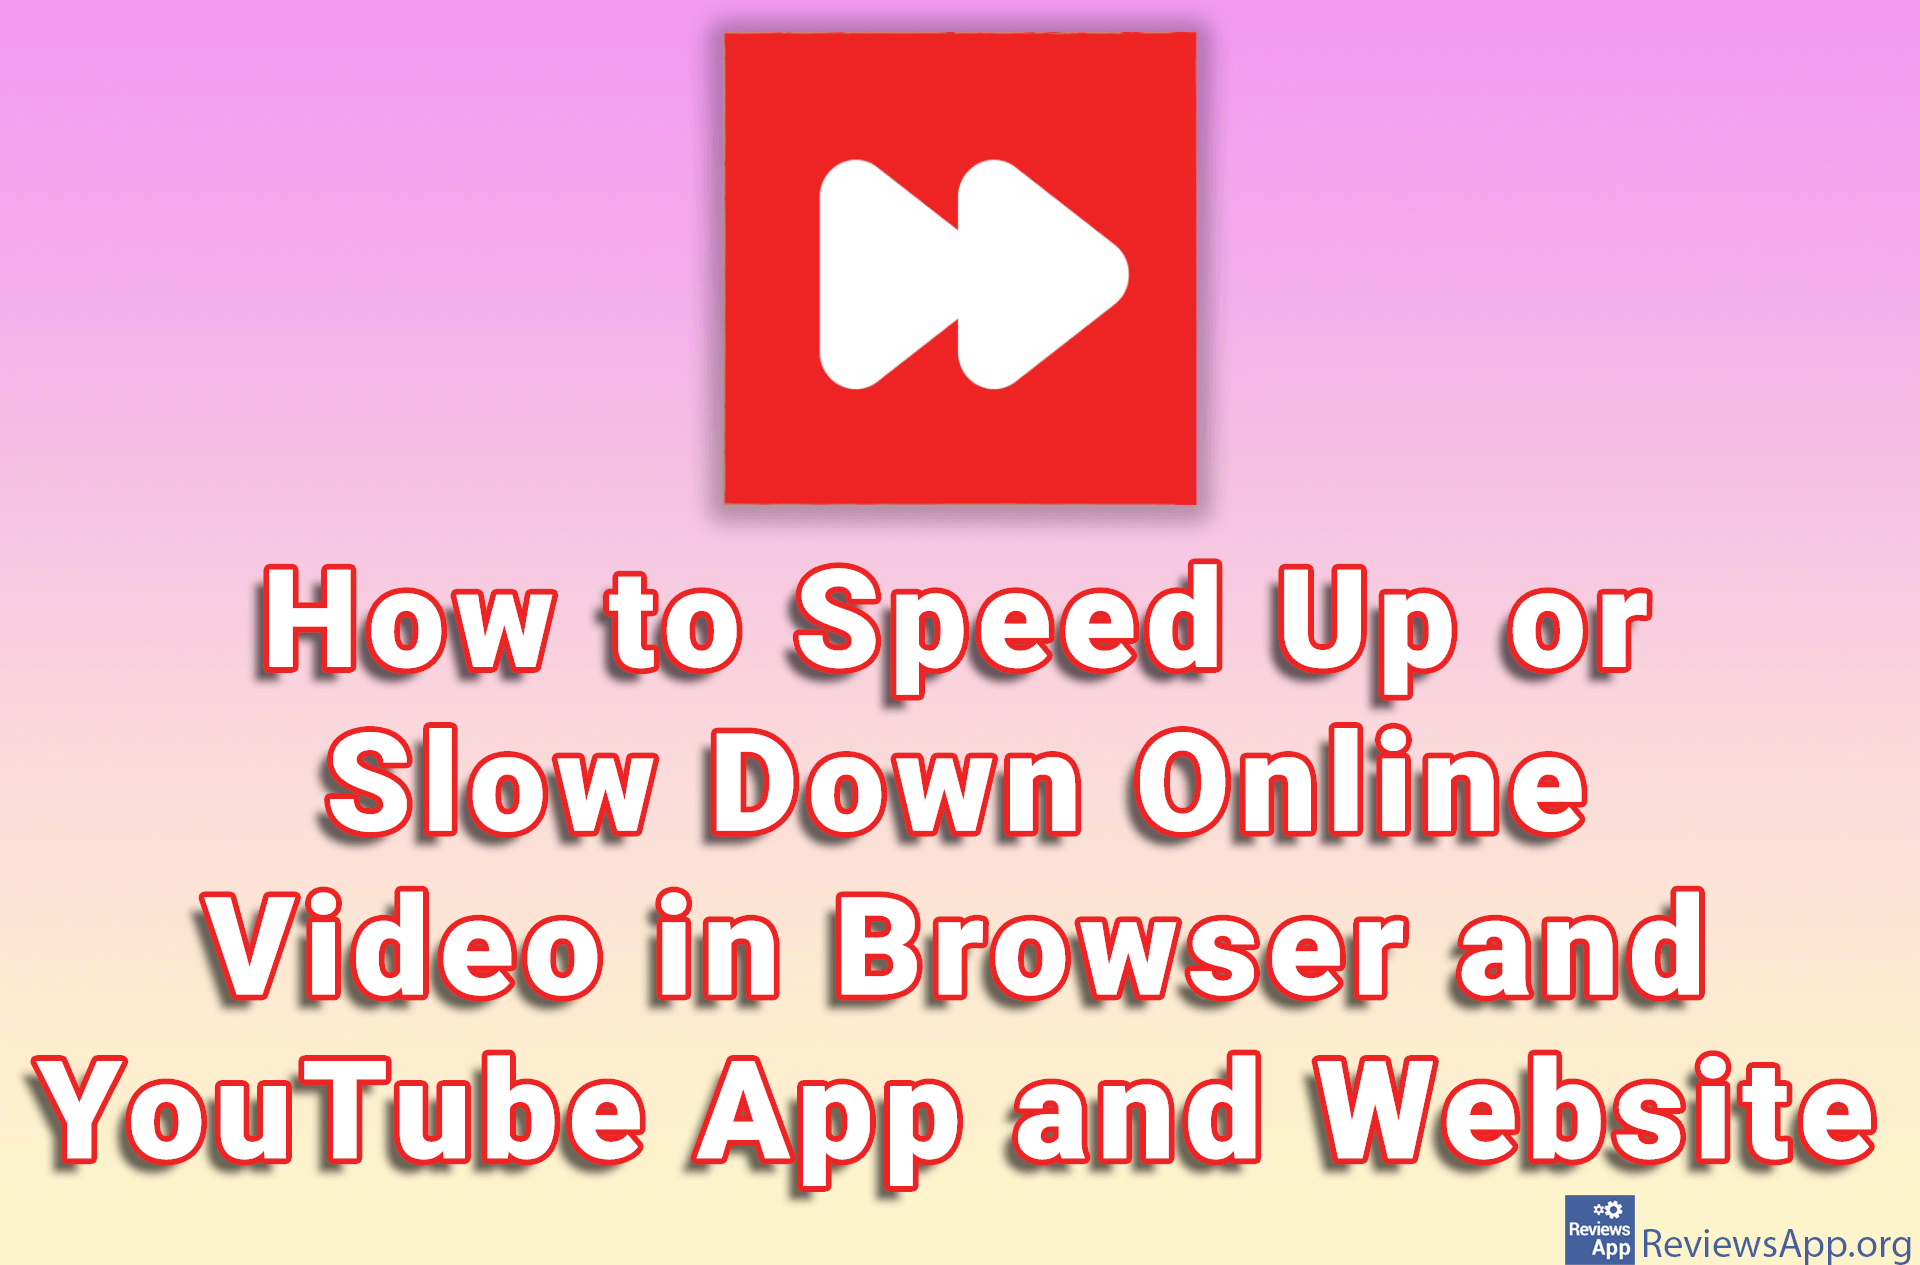 How to Speed Up or Slow Down Online Video in Browser and YouTube App and Website